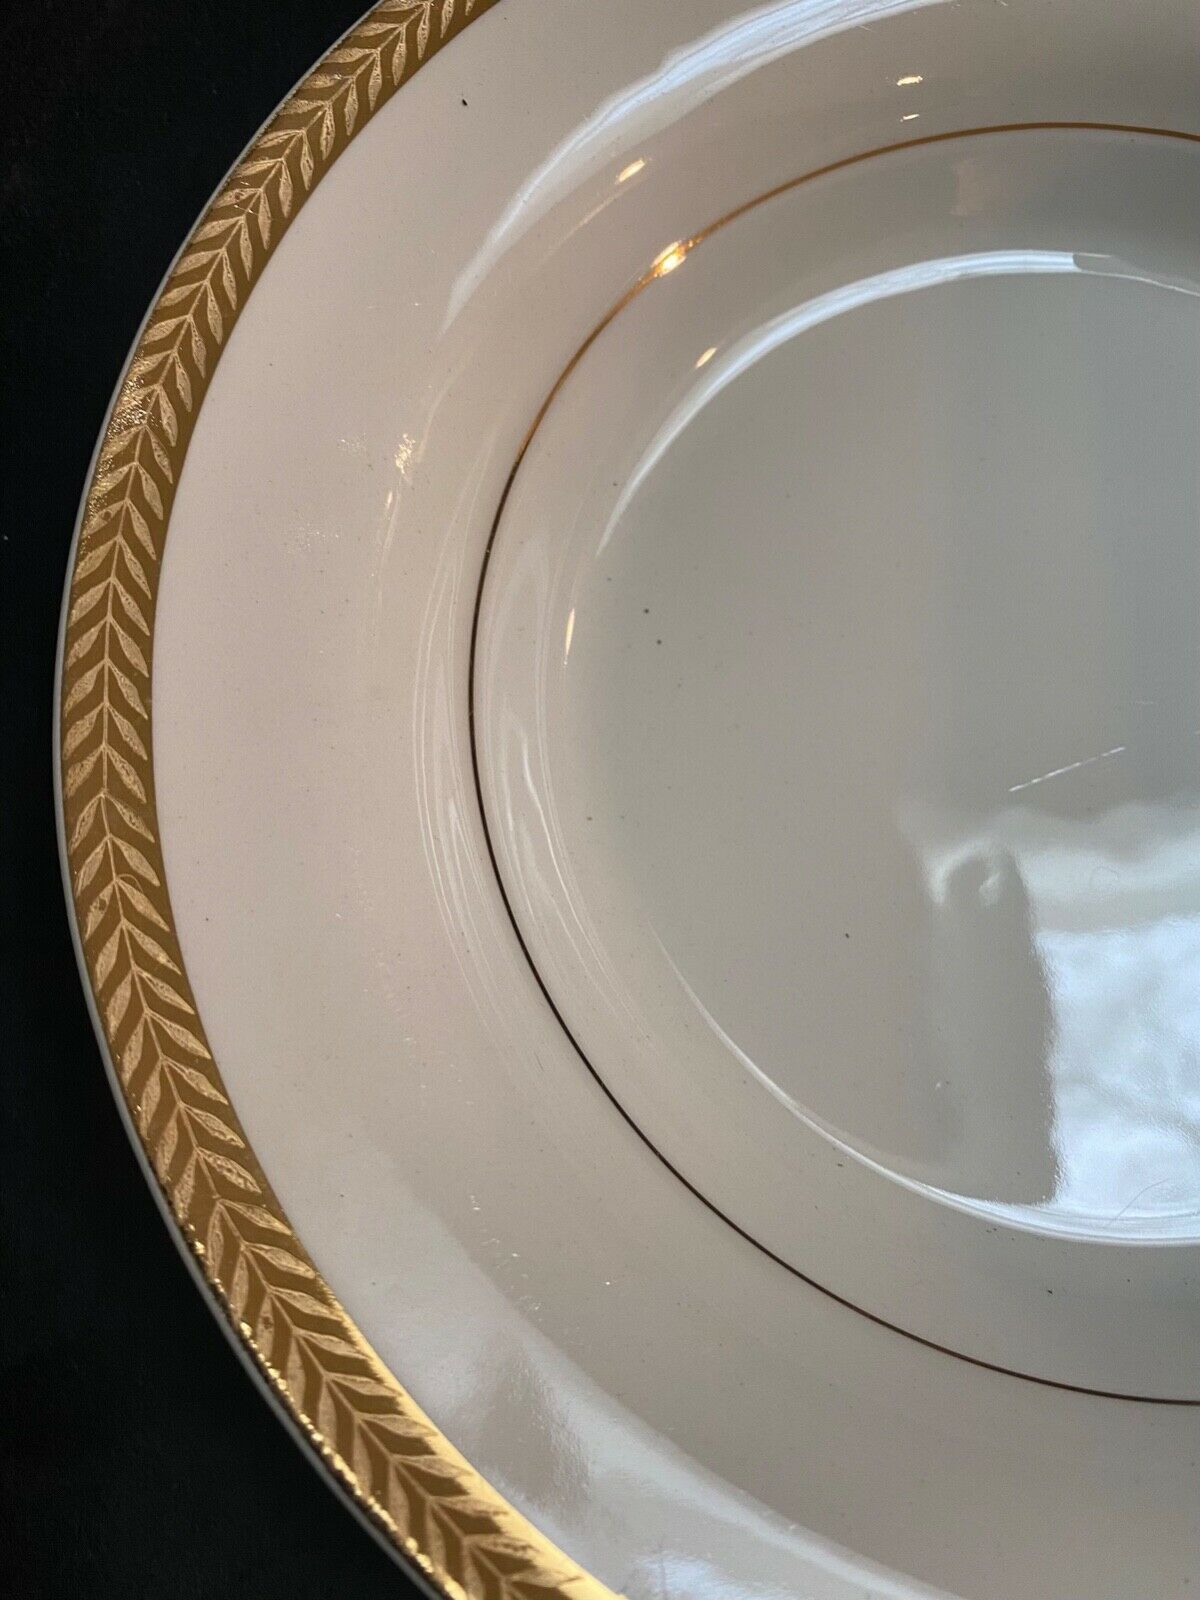 Candle Light, American Limoges 8 Soup Dish, 22k Gold